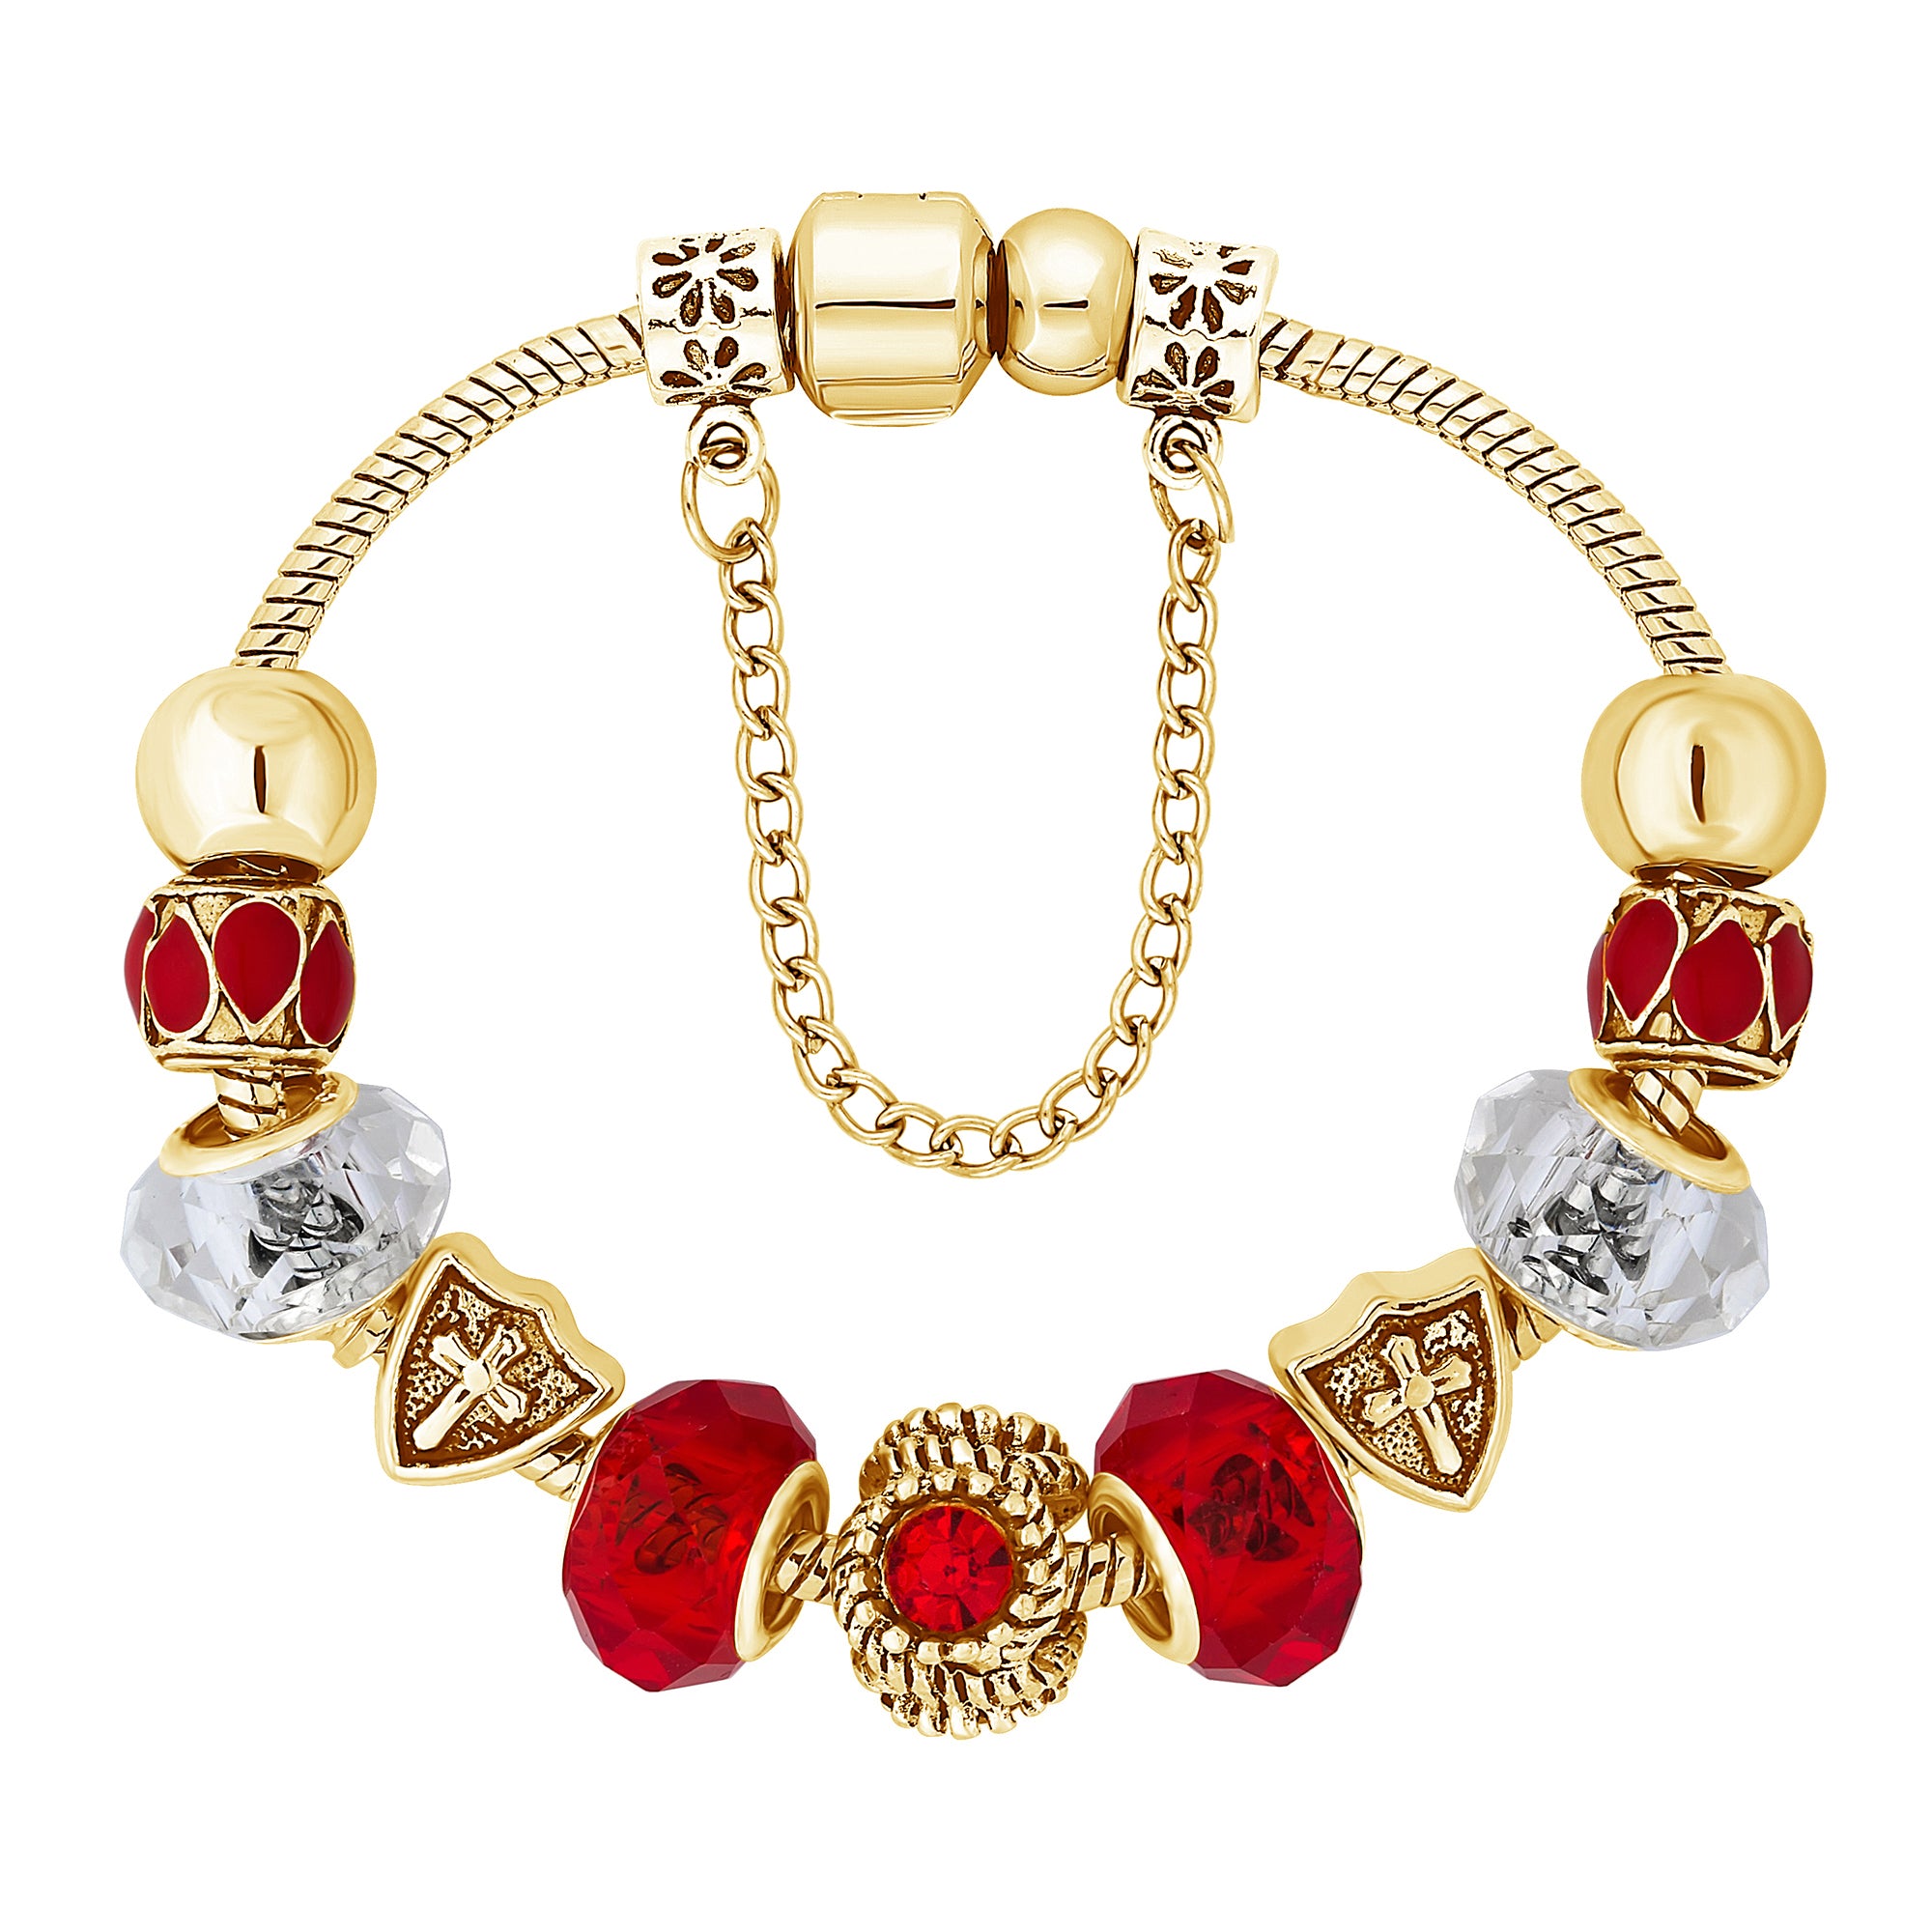 Ava Bracelet in Red with Gold Plating